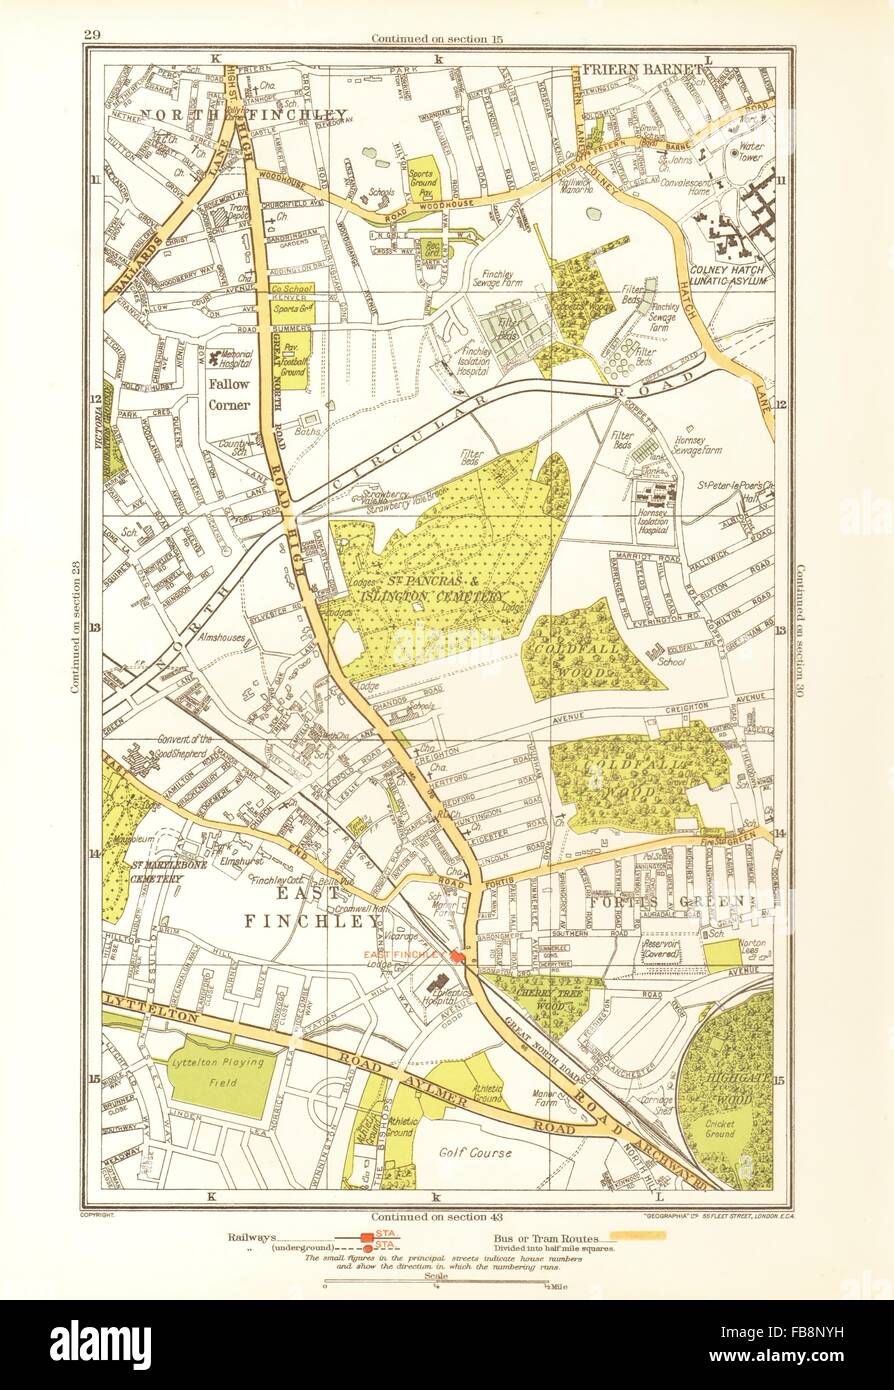 FINCHLEY. Fortis Green, Friern Barnet, Muswell Hill, angolo di maggese, 1933 Mappa Foto Stock